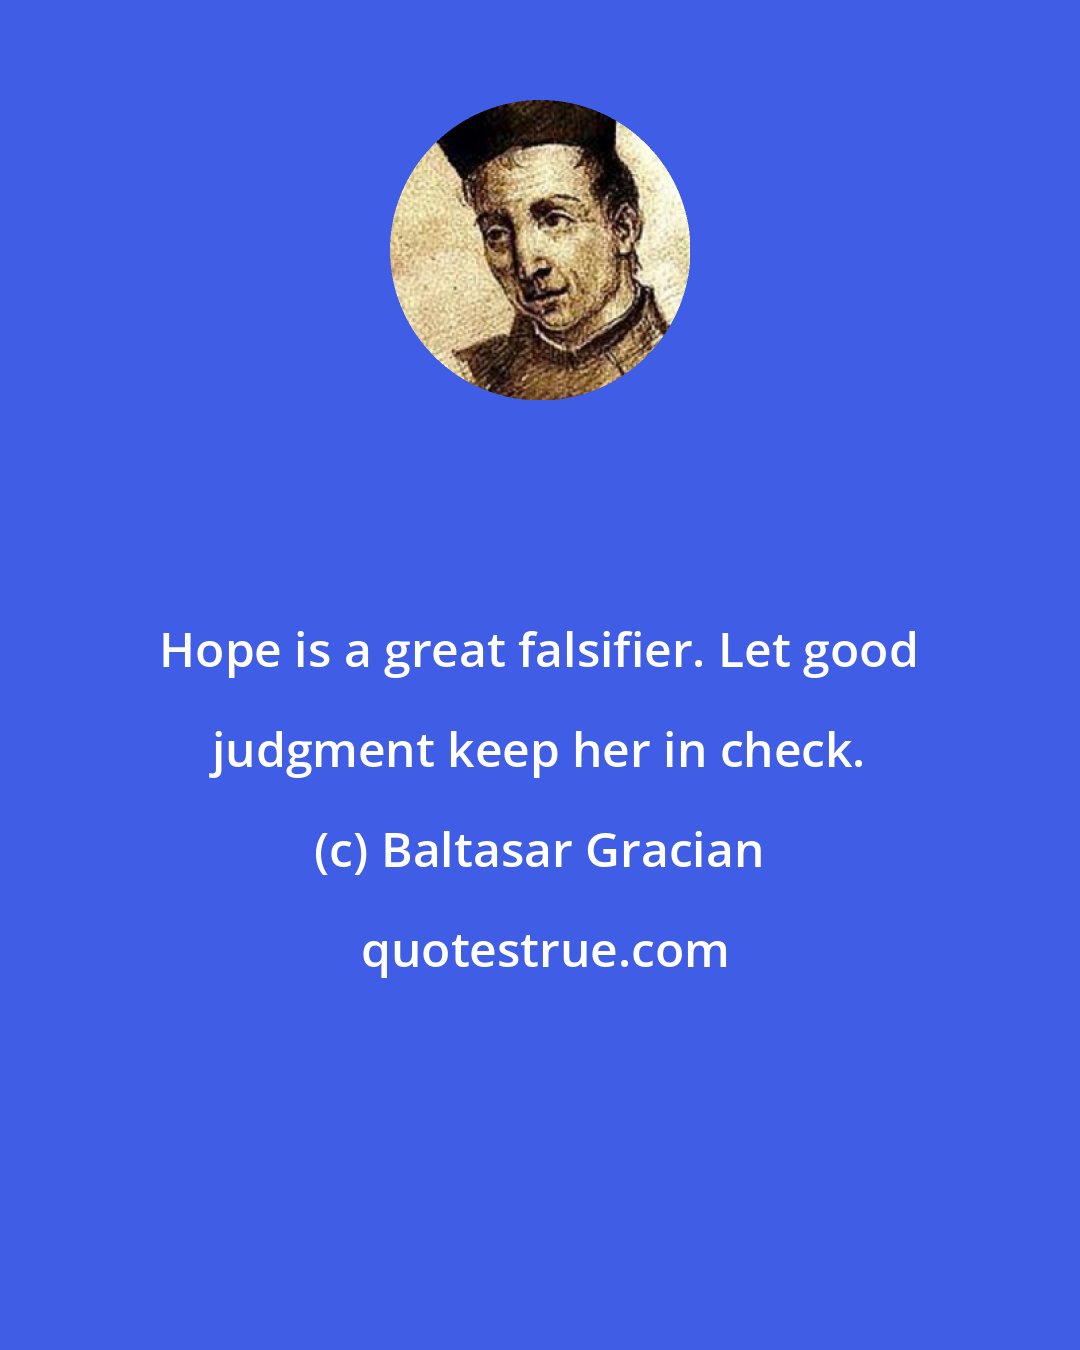 Baltasar Gracian: Hope is a great falsifier. Let good judgment keep her in check.